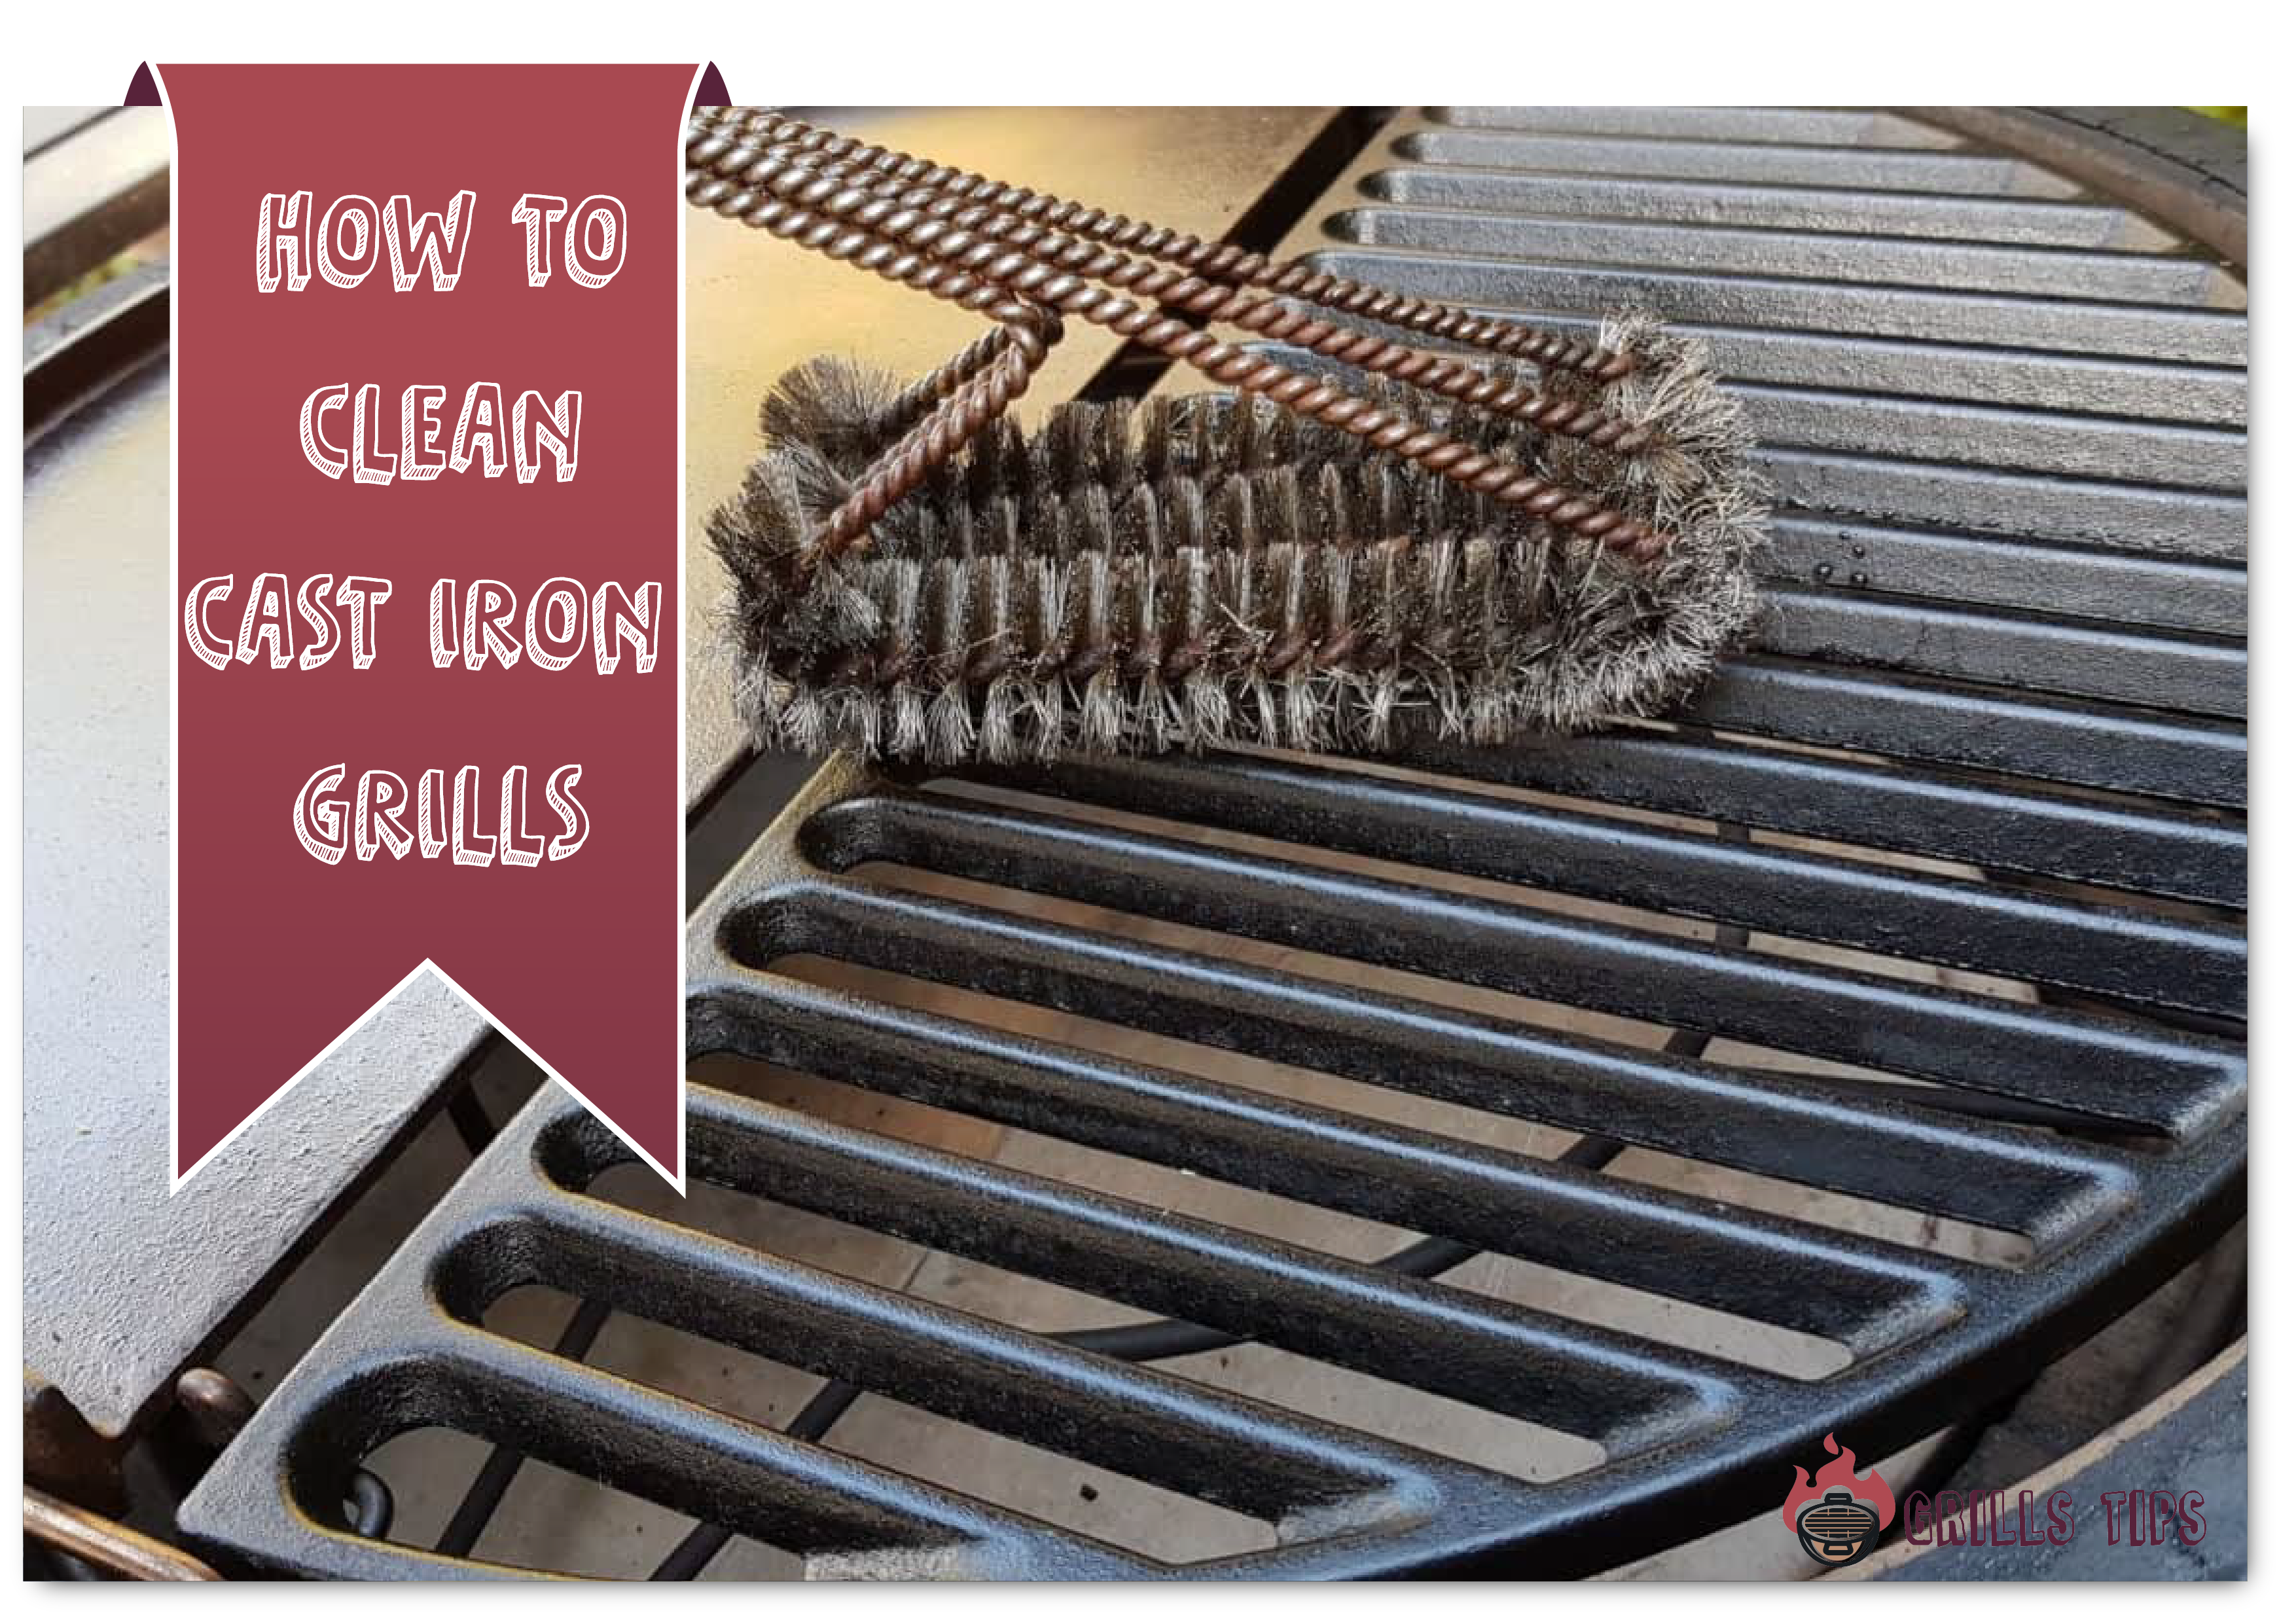 HOW TO CLEAN CAST IRON GRILLS